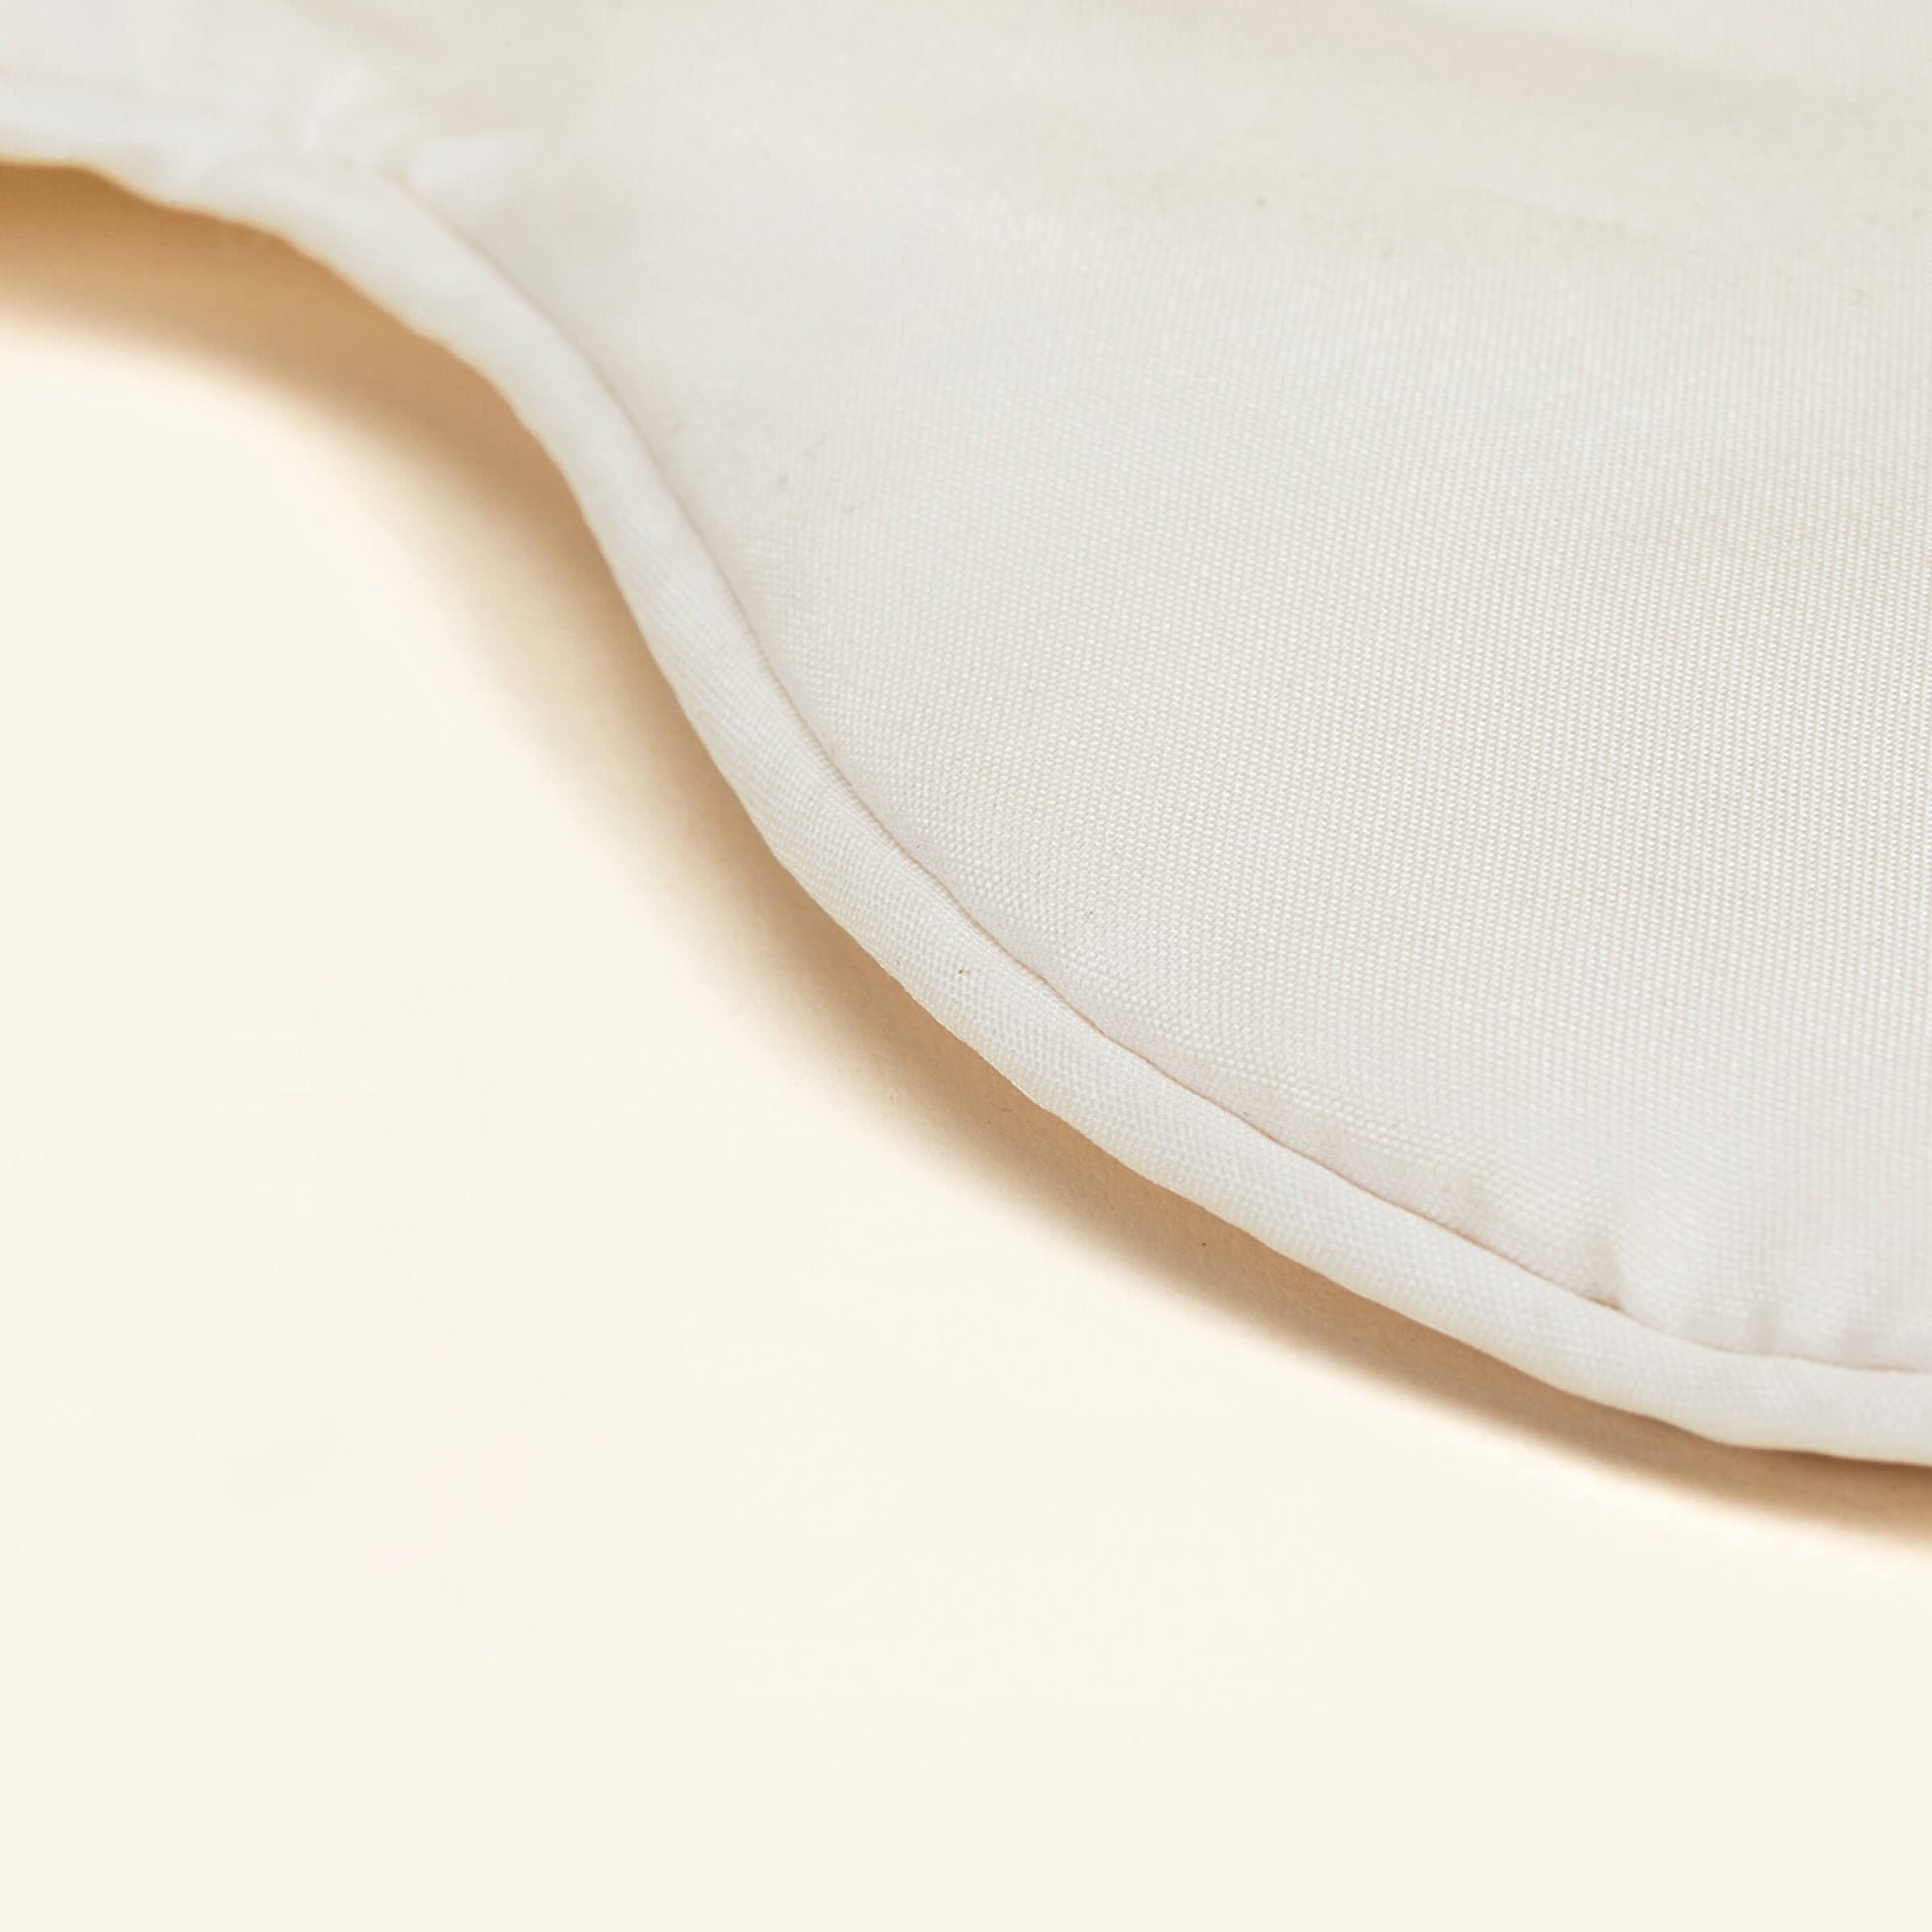 A close up of the Slumber Cloud 100% Silk Sleep Mask made with Outlast temperature regulation technology